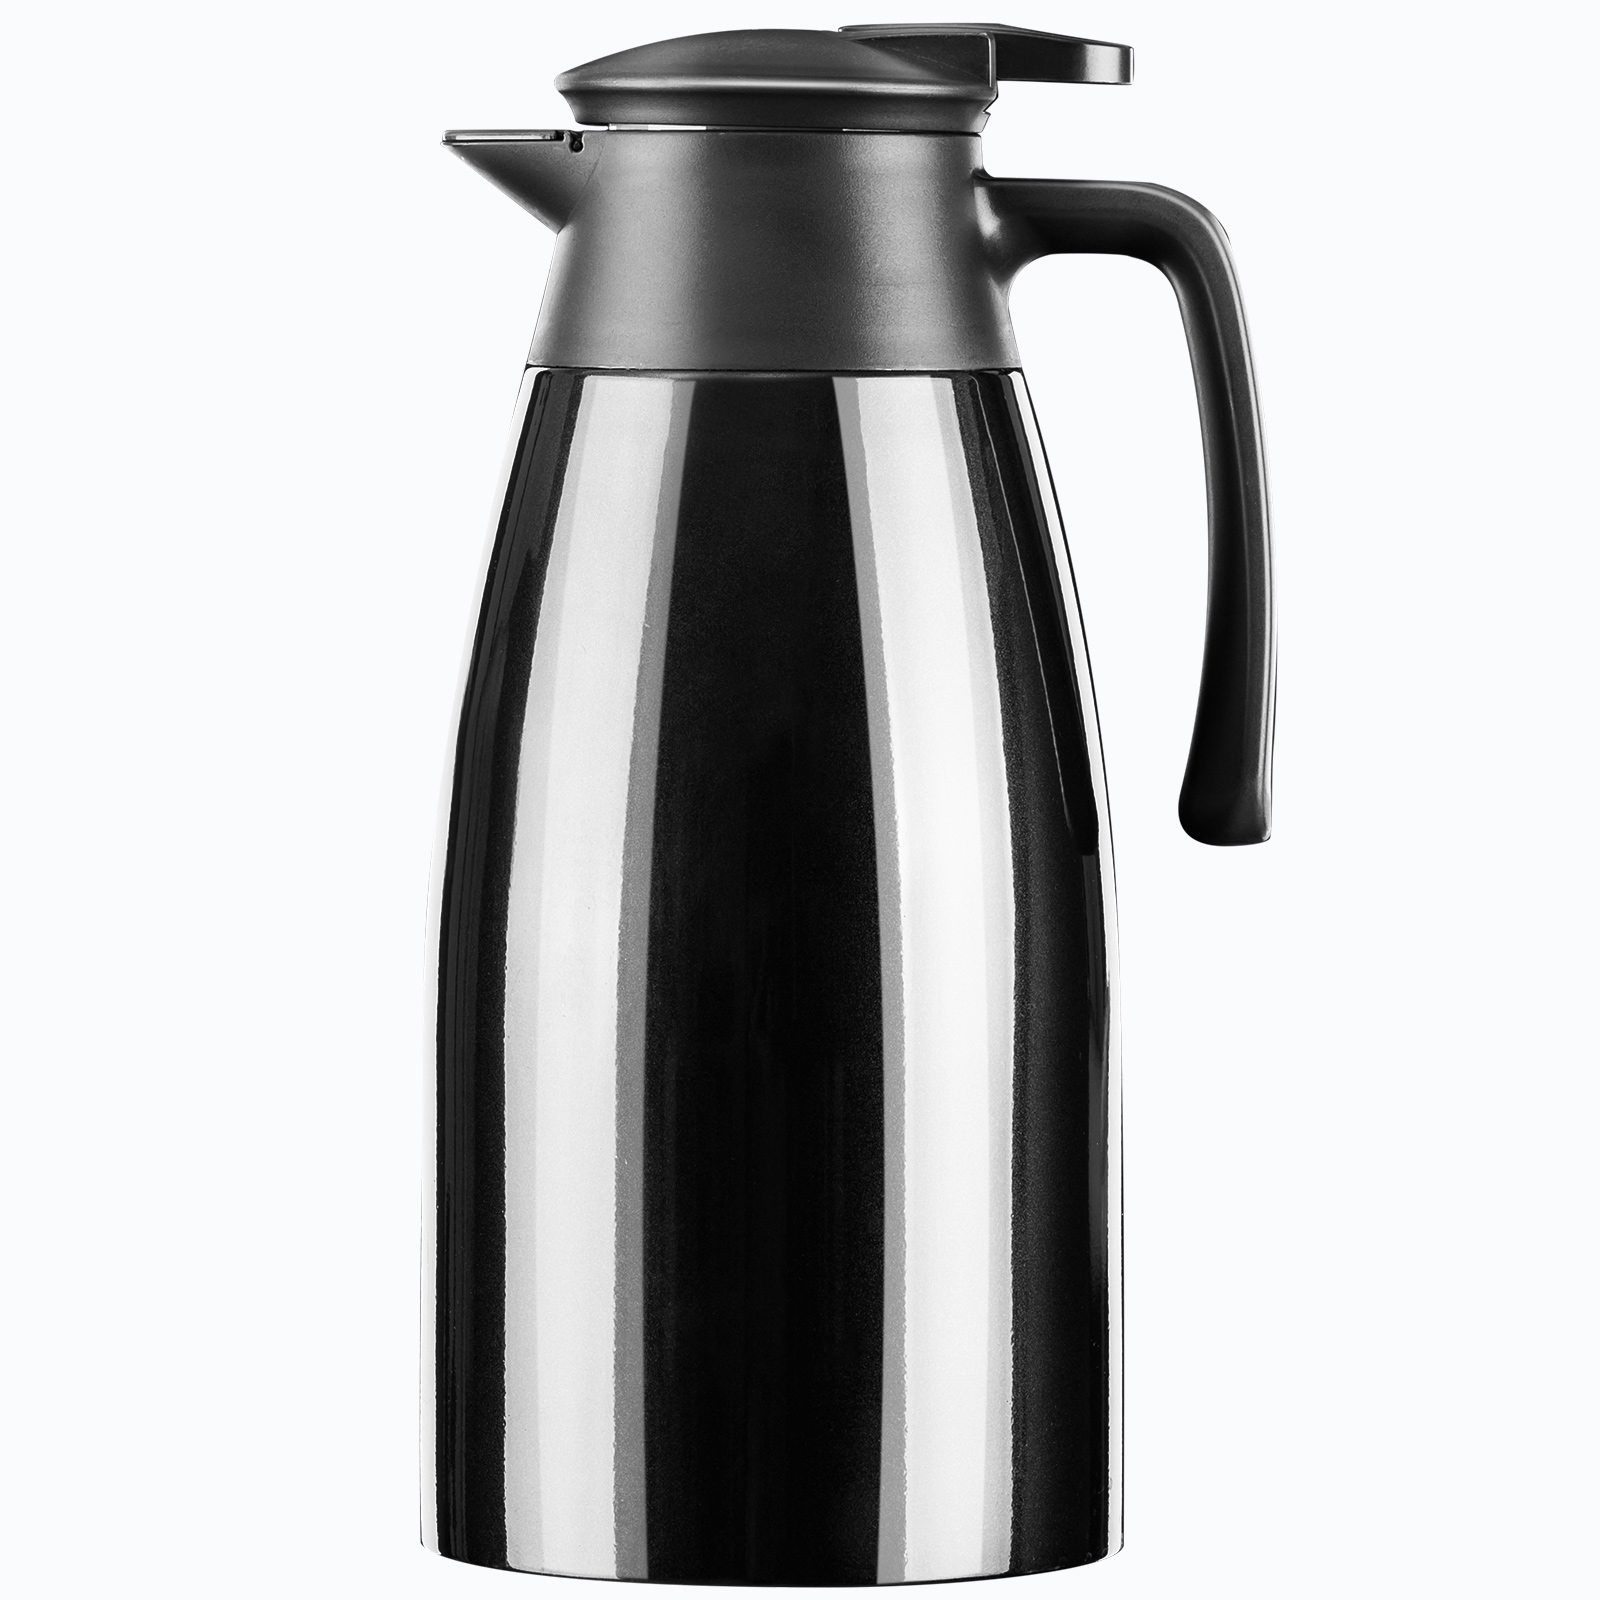  Thermal Coffee Carafe 68oz / 2L - 24 Hours Hot Beverage  Dispenser, Insulated Stainless Steel Water Coffee Urn, Coffee Carafes For  Keeping Hot Coffee Dispenser for Parties - Hot Chocolate Dispenser